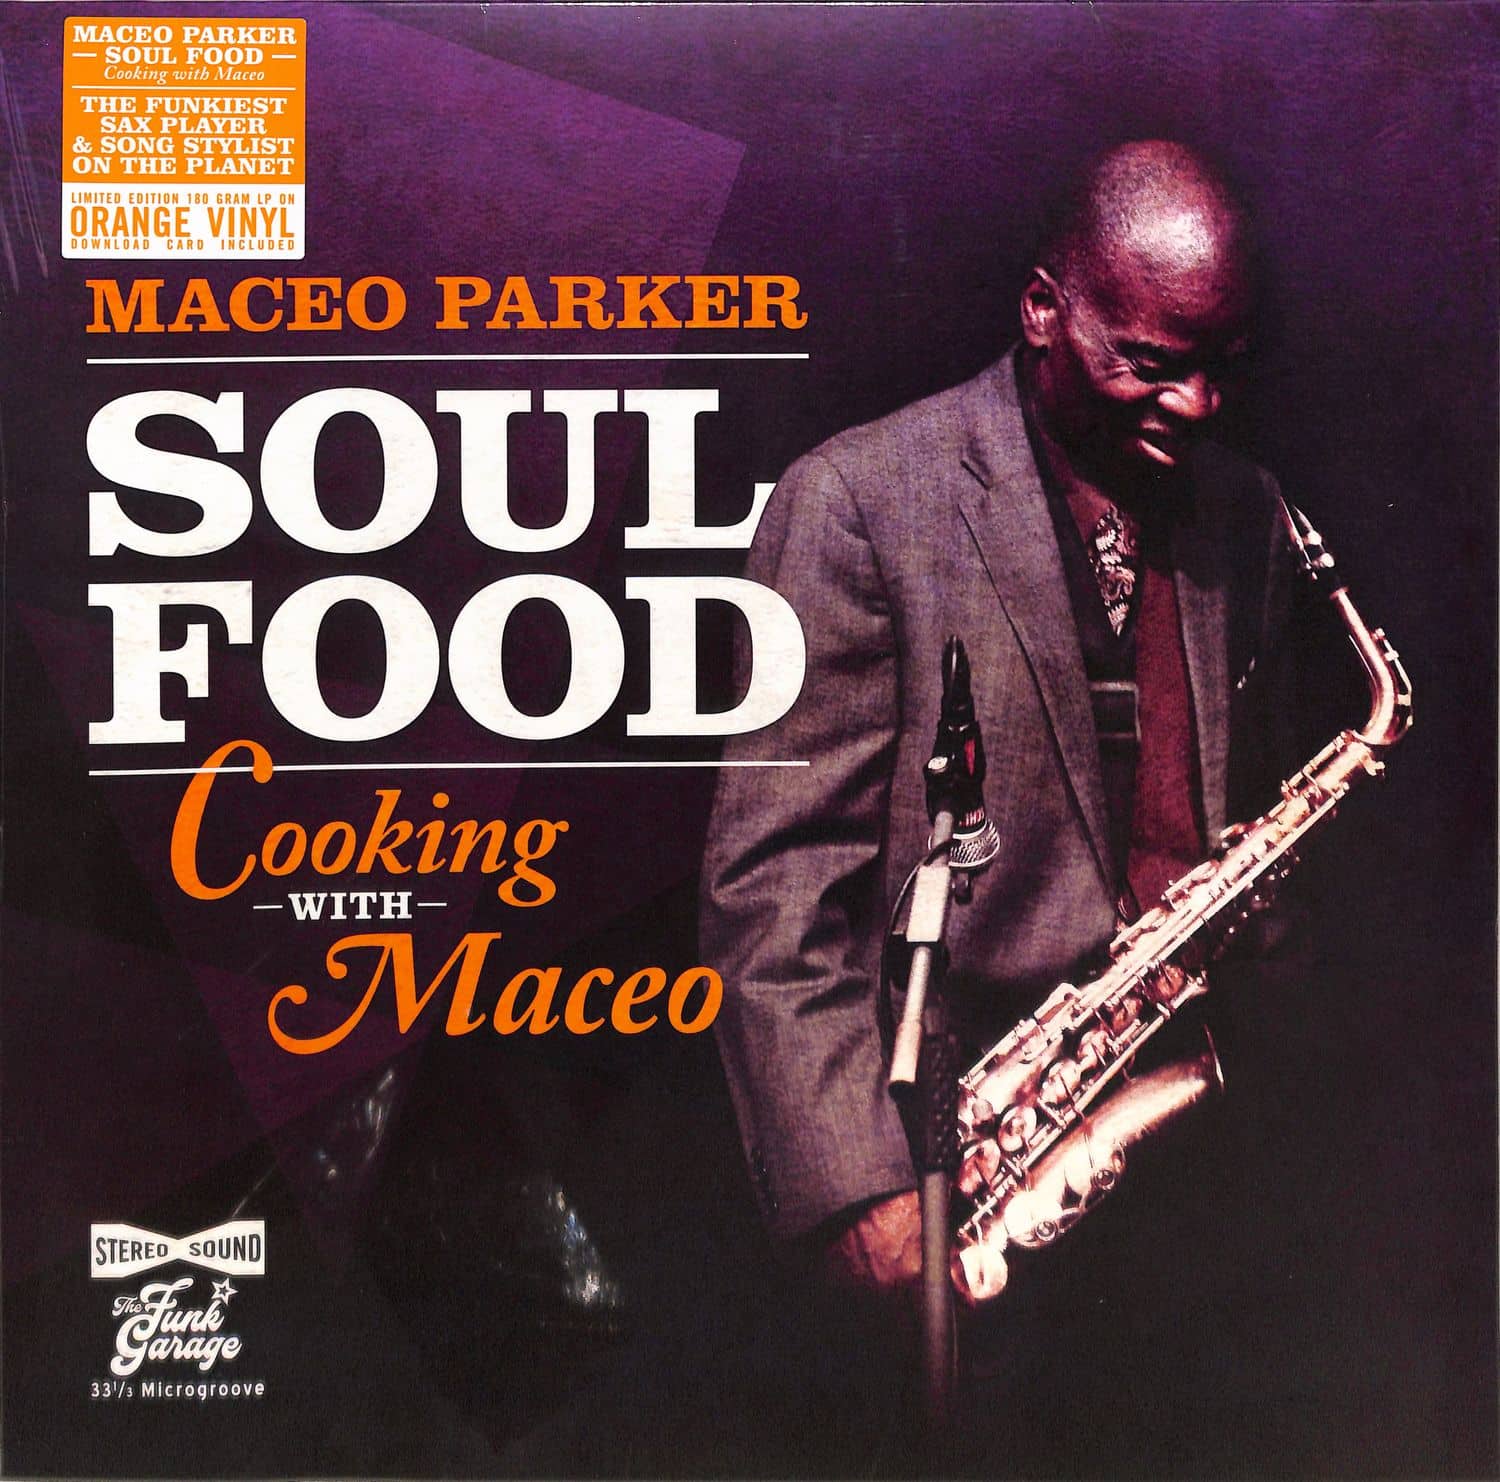 Maceo Parker - SOUL FOOD: COOKING WITH MACEO 